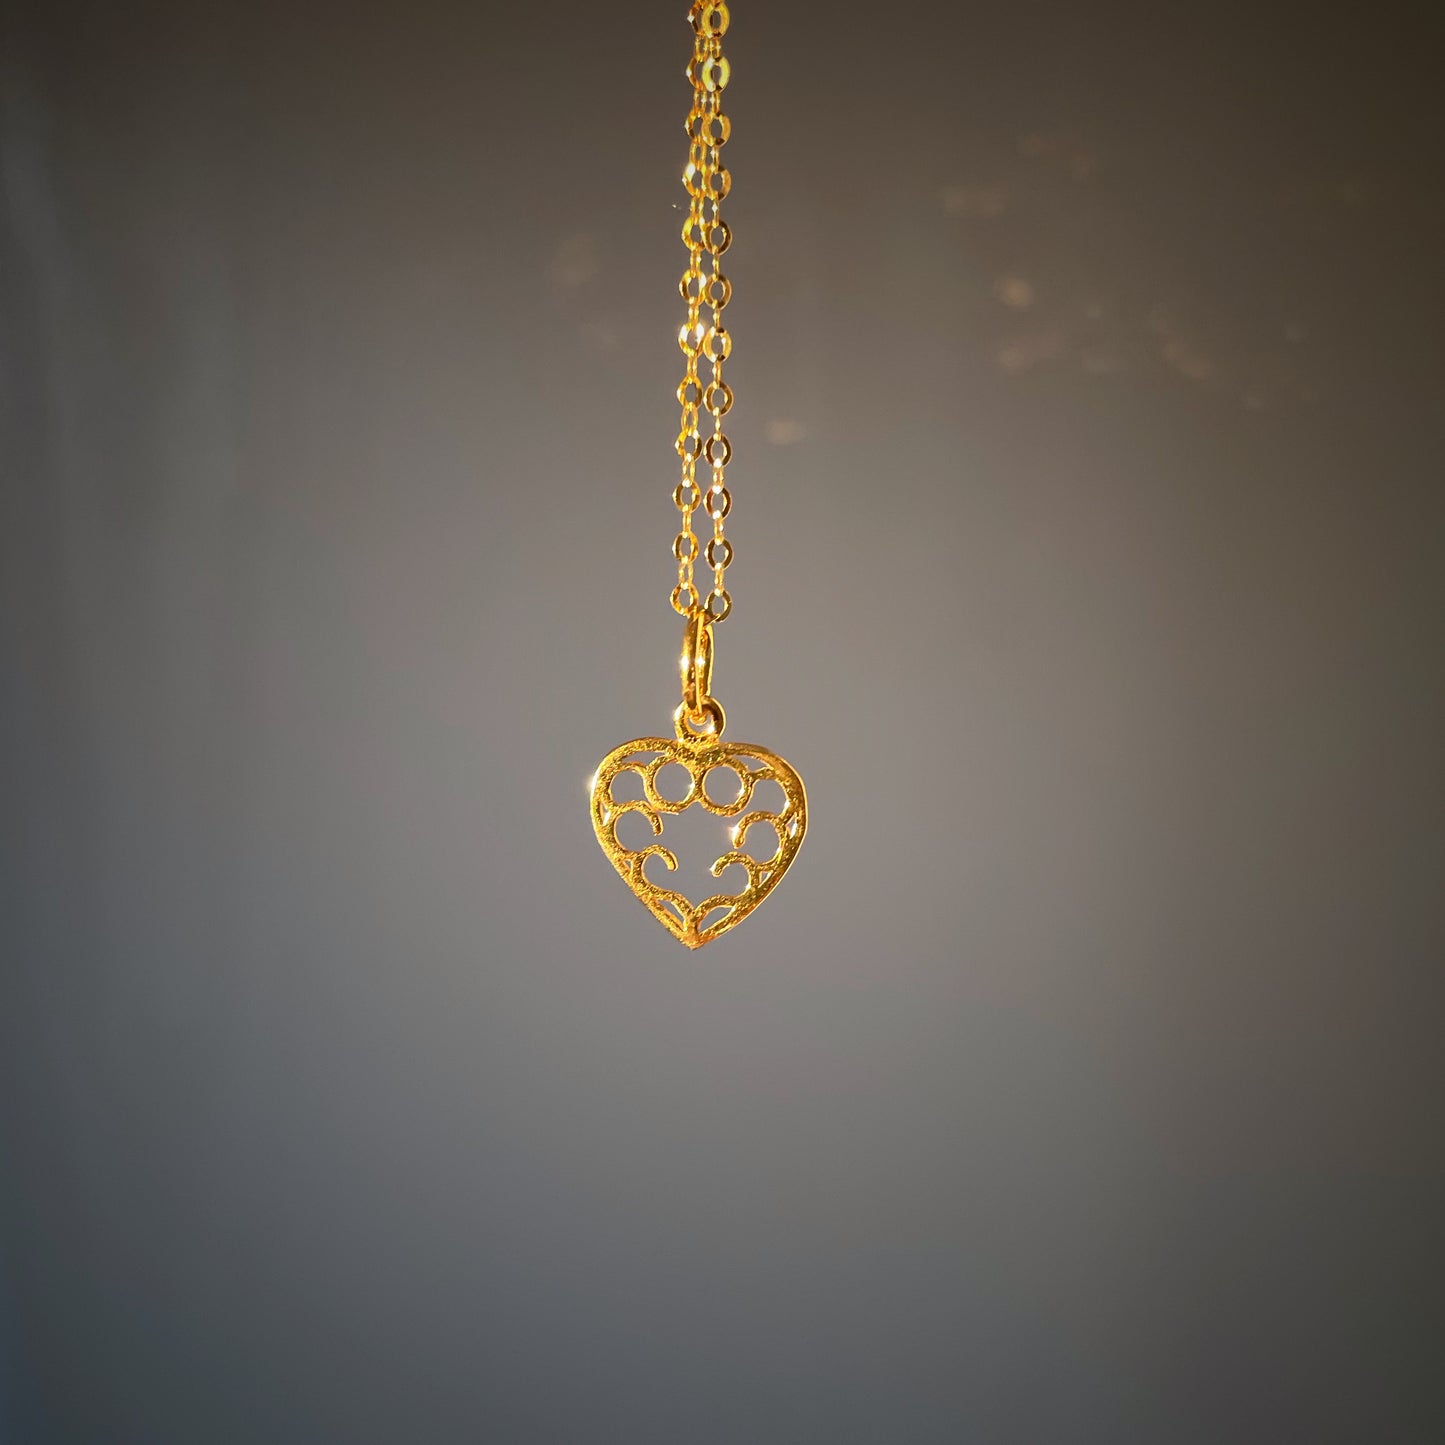 Ornament Heart necklace